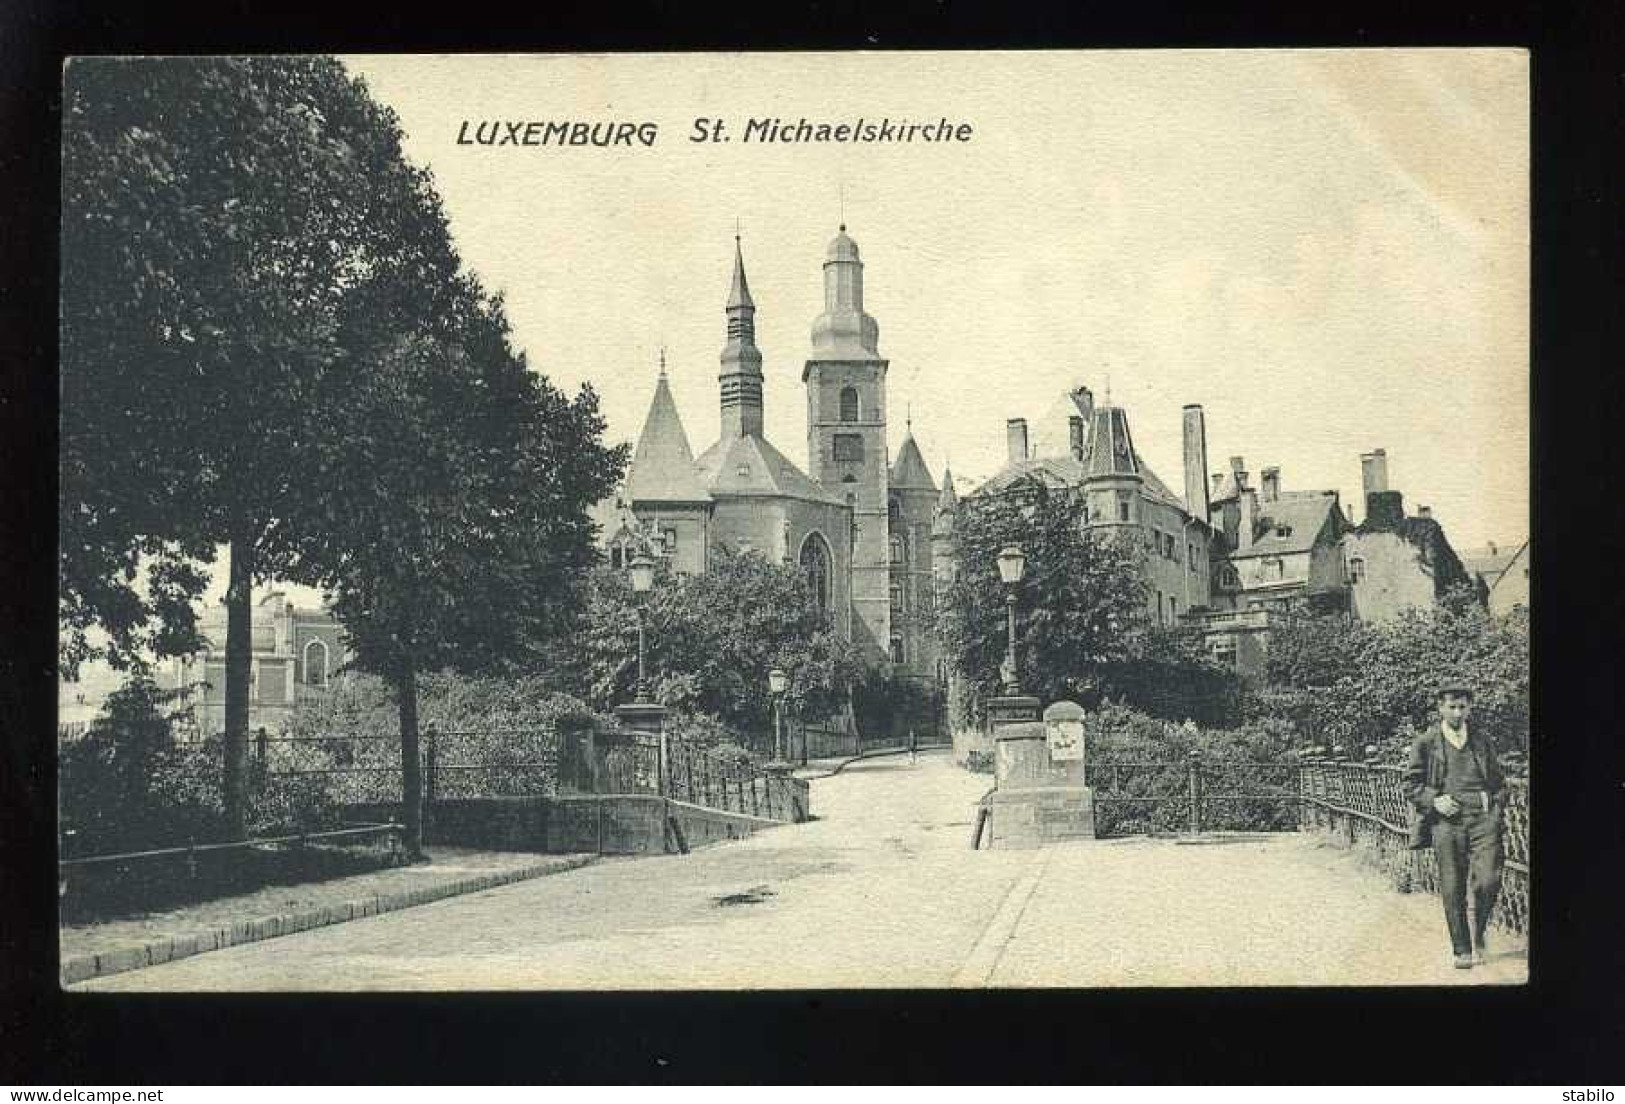 LUXEMBOURG-VILLE - ST MICHAELSKIRCHE - Luxembourg - Ville